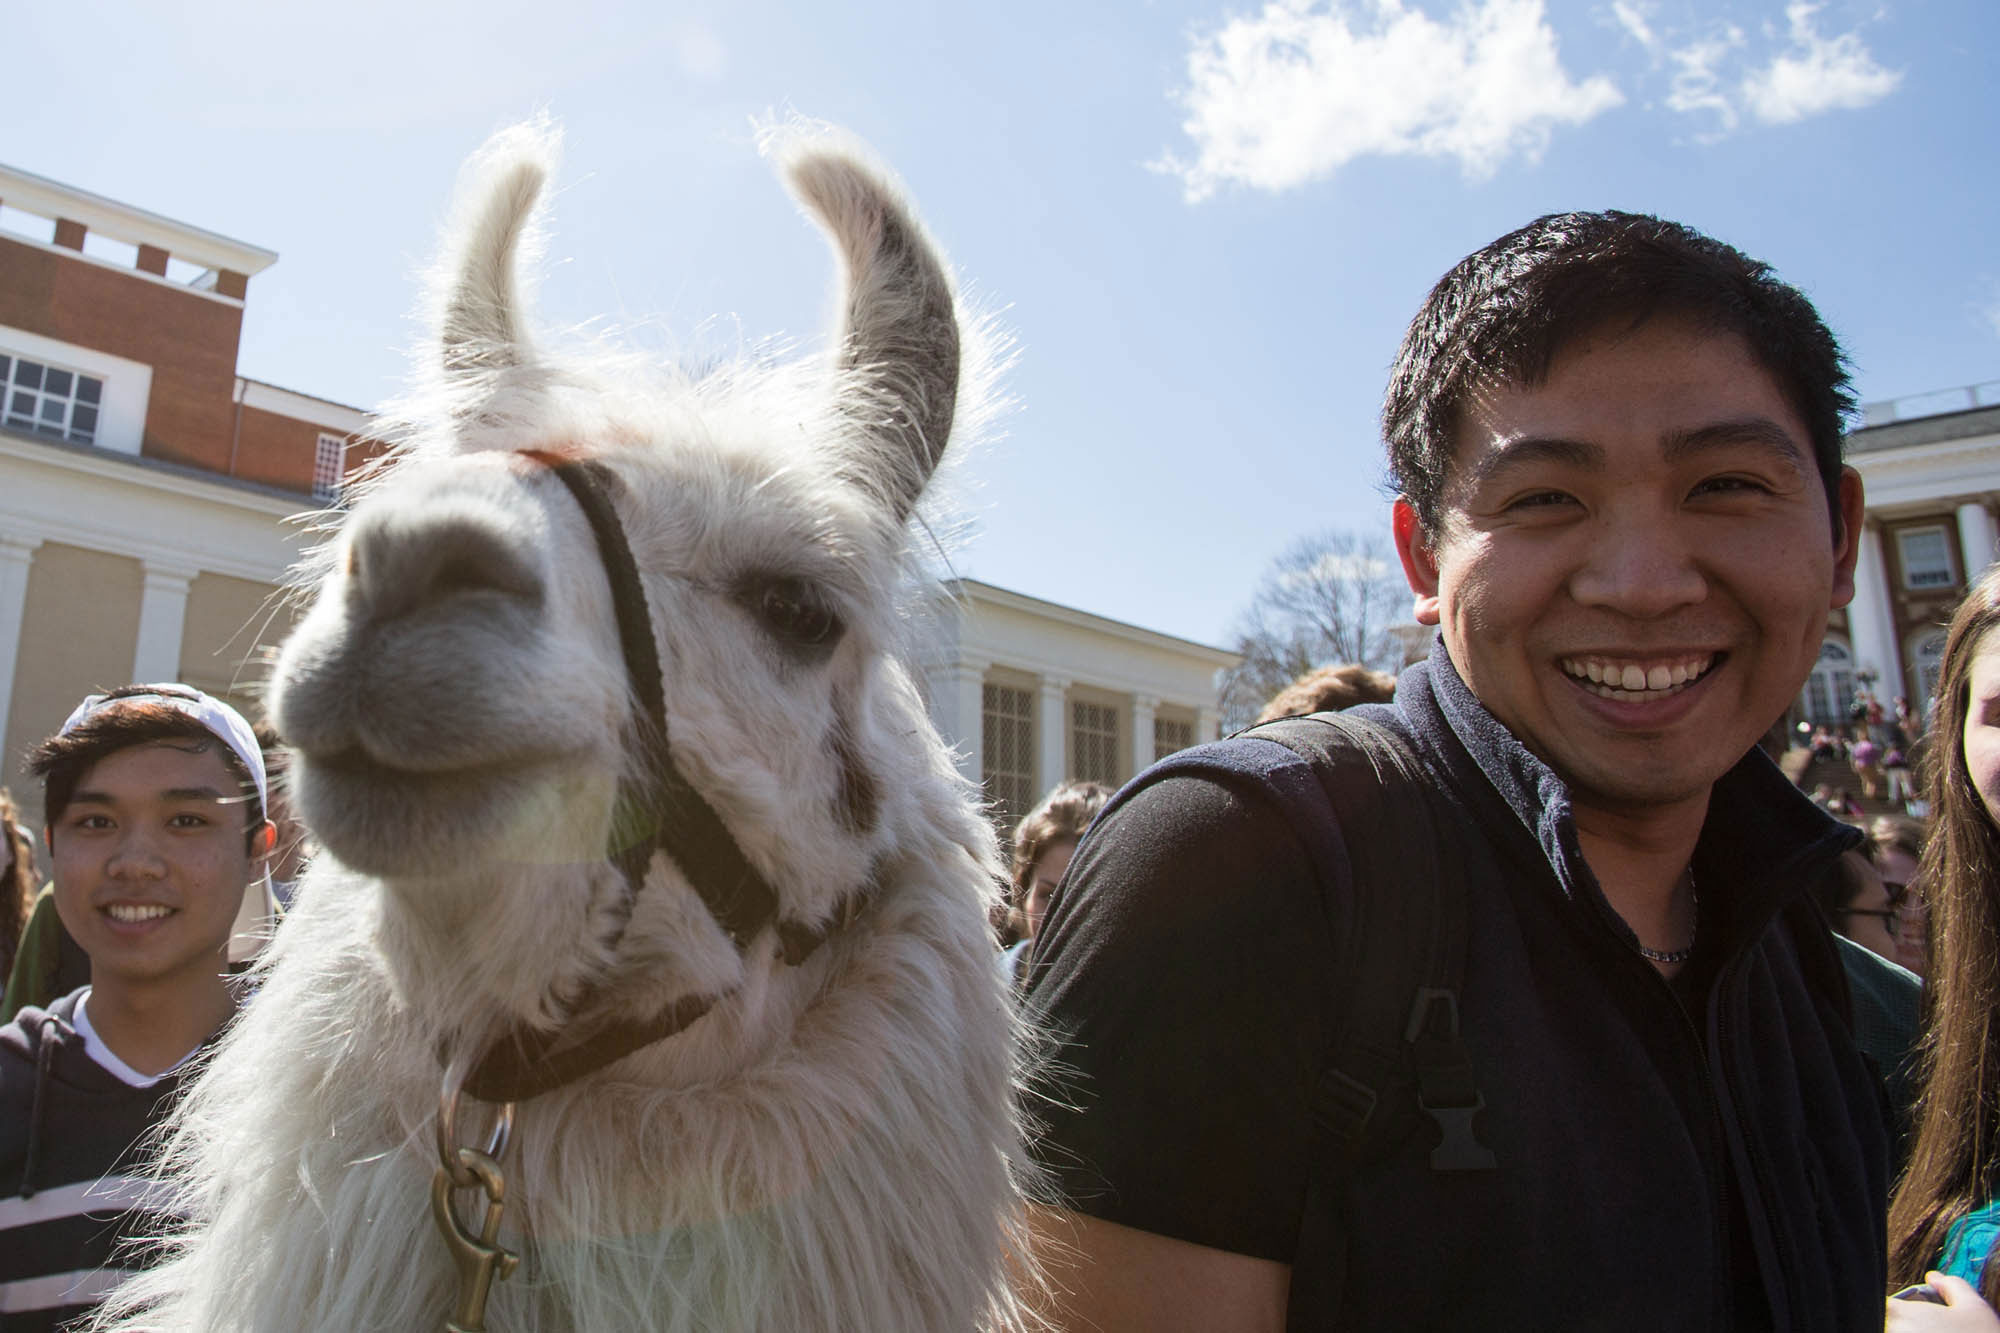 Students standing with an alpaca smiling at the camera